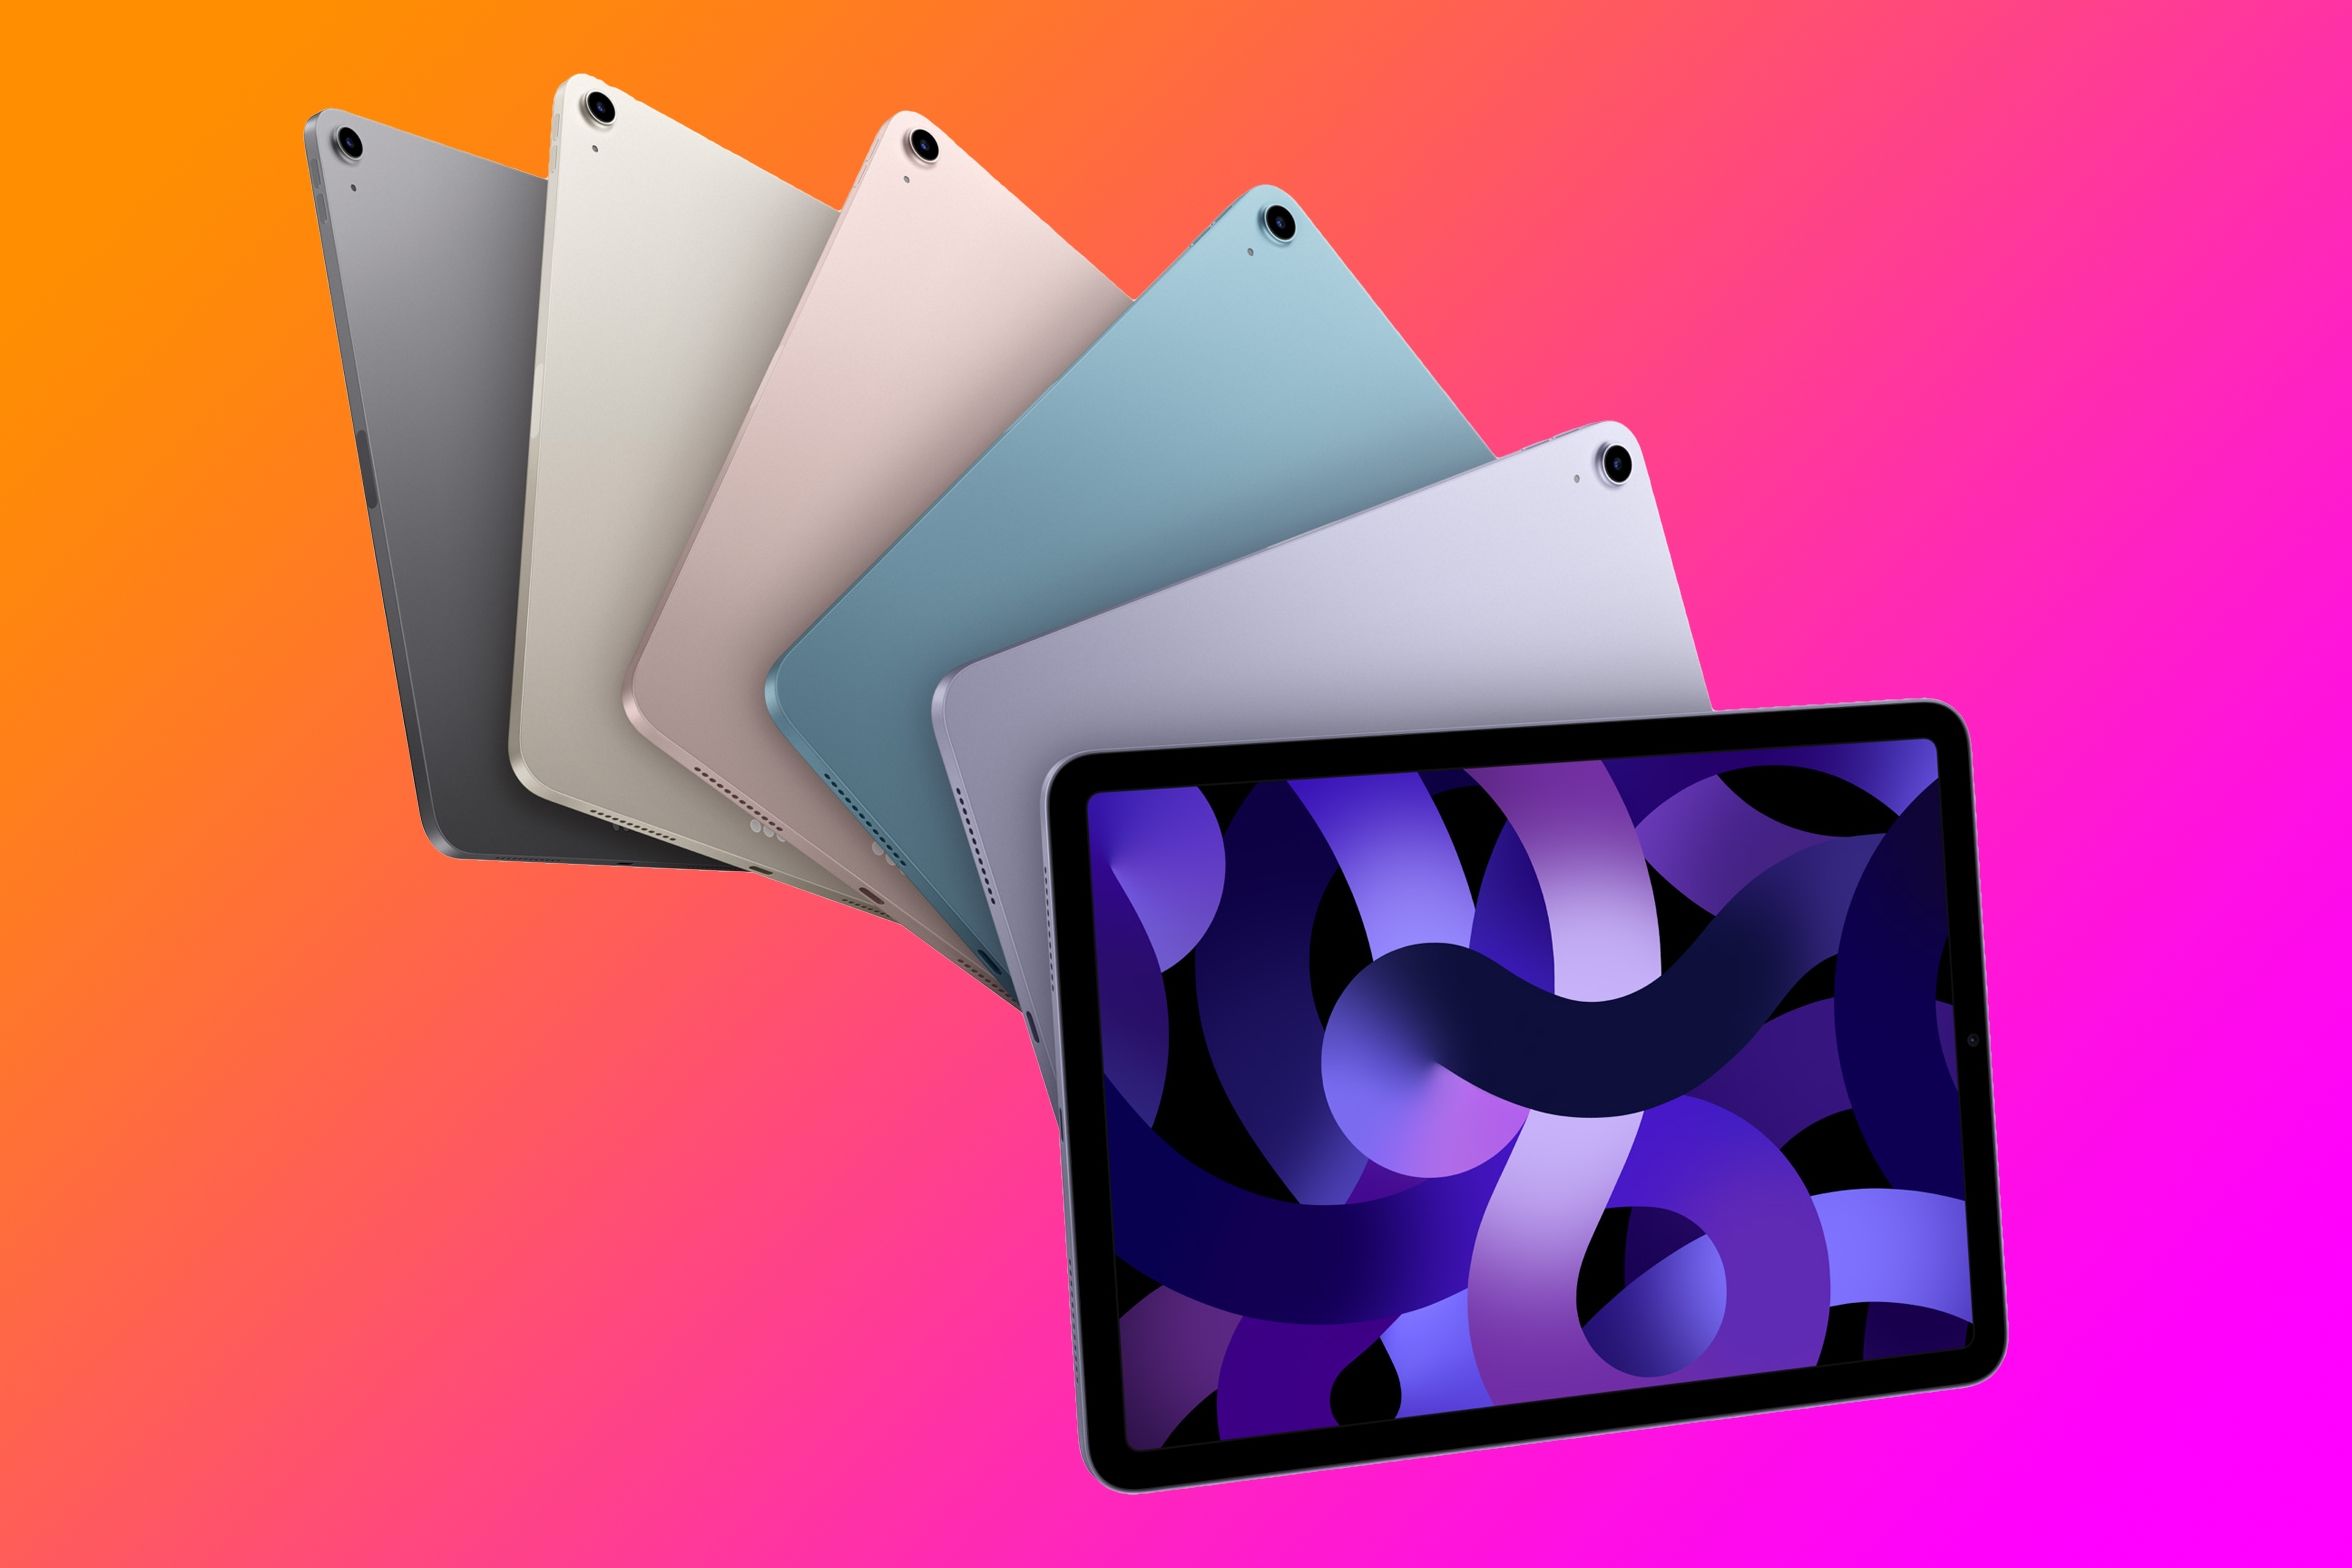 Six iPad Air tablets, fanned out, showcasing the available color options